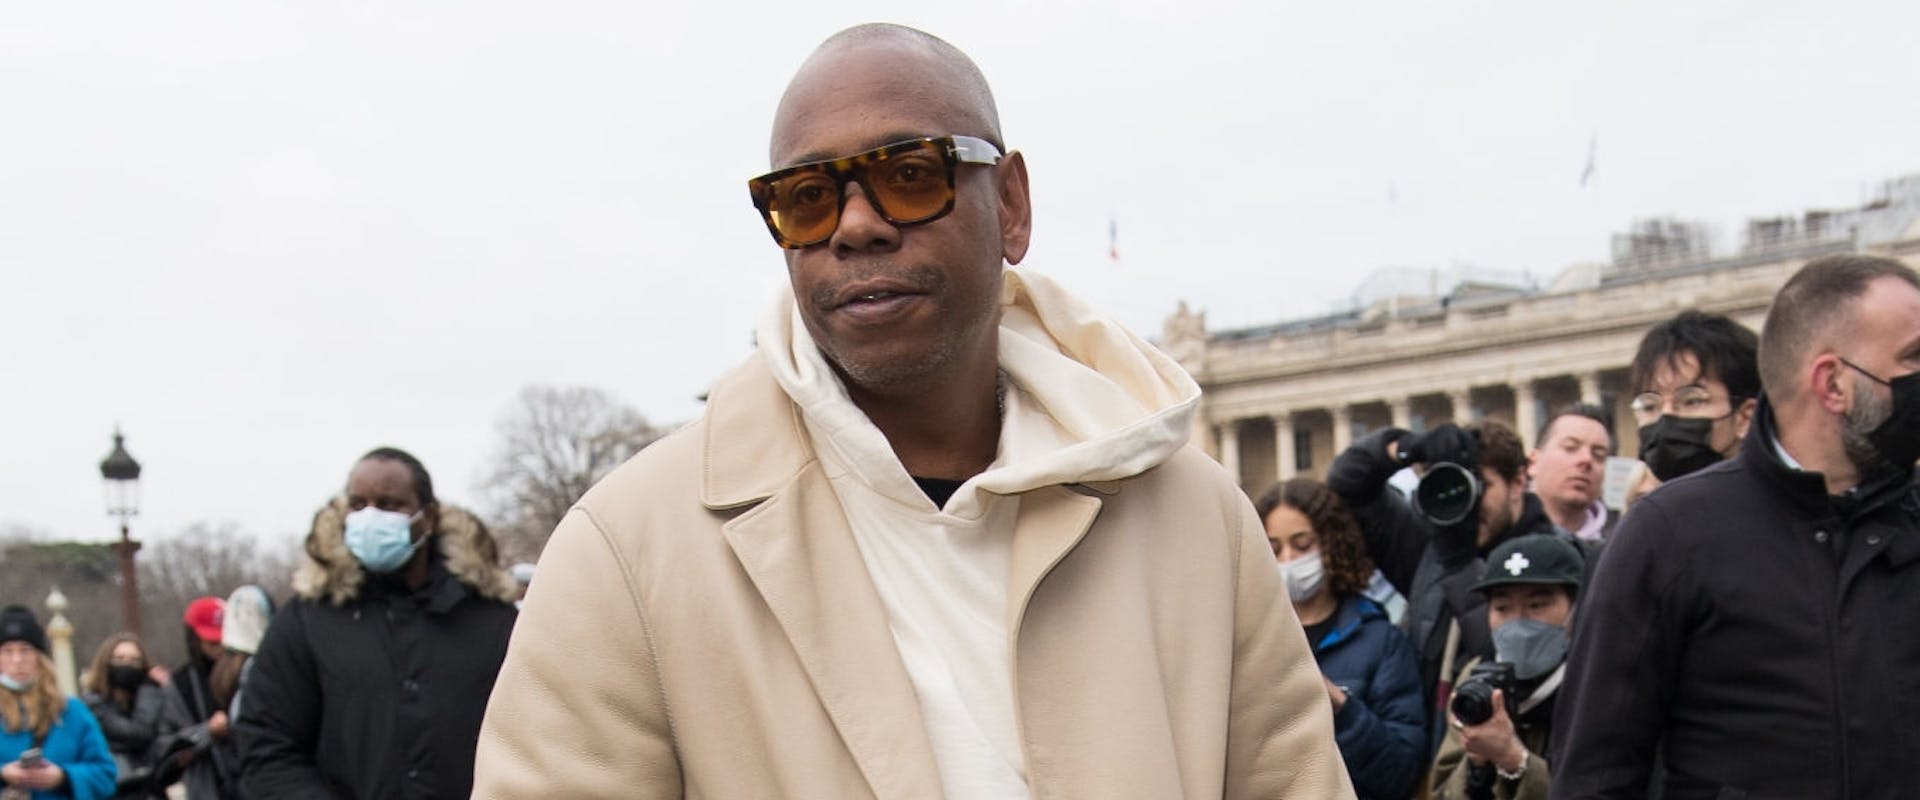 Dave Chappelle to Host 'SNL' — Black Star to Perform